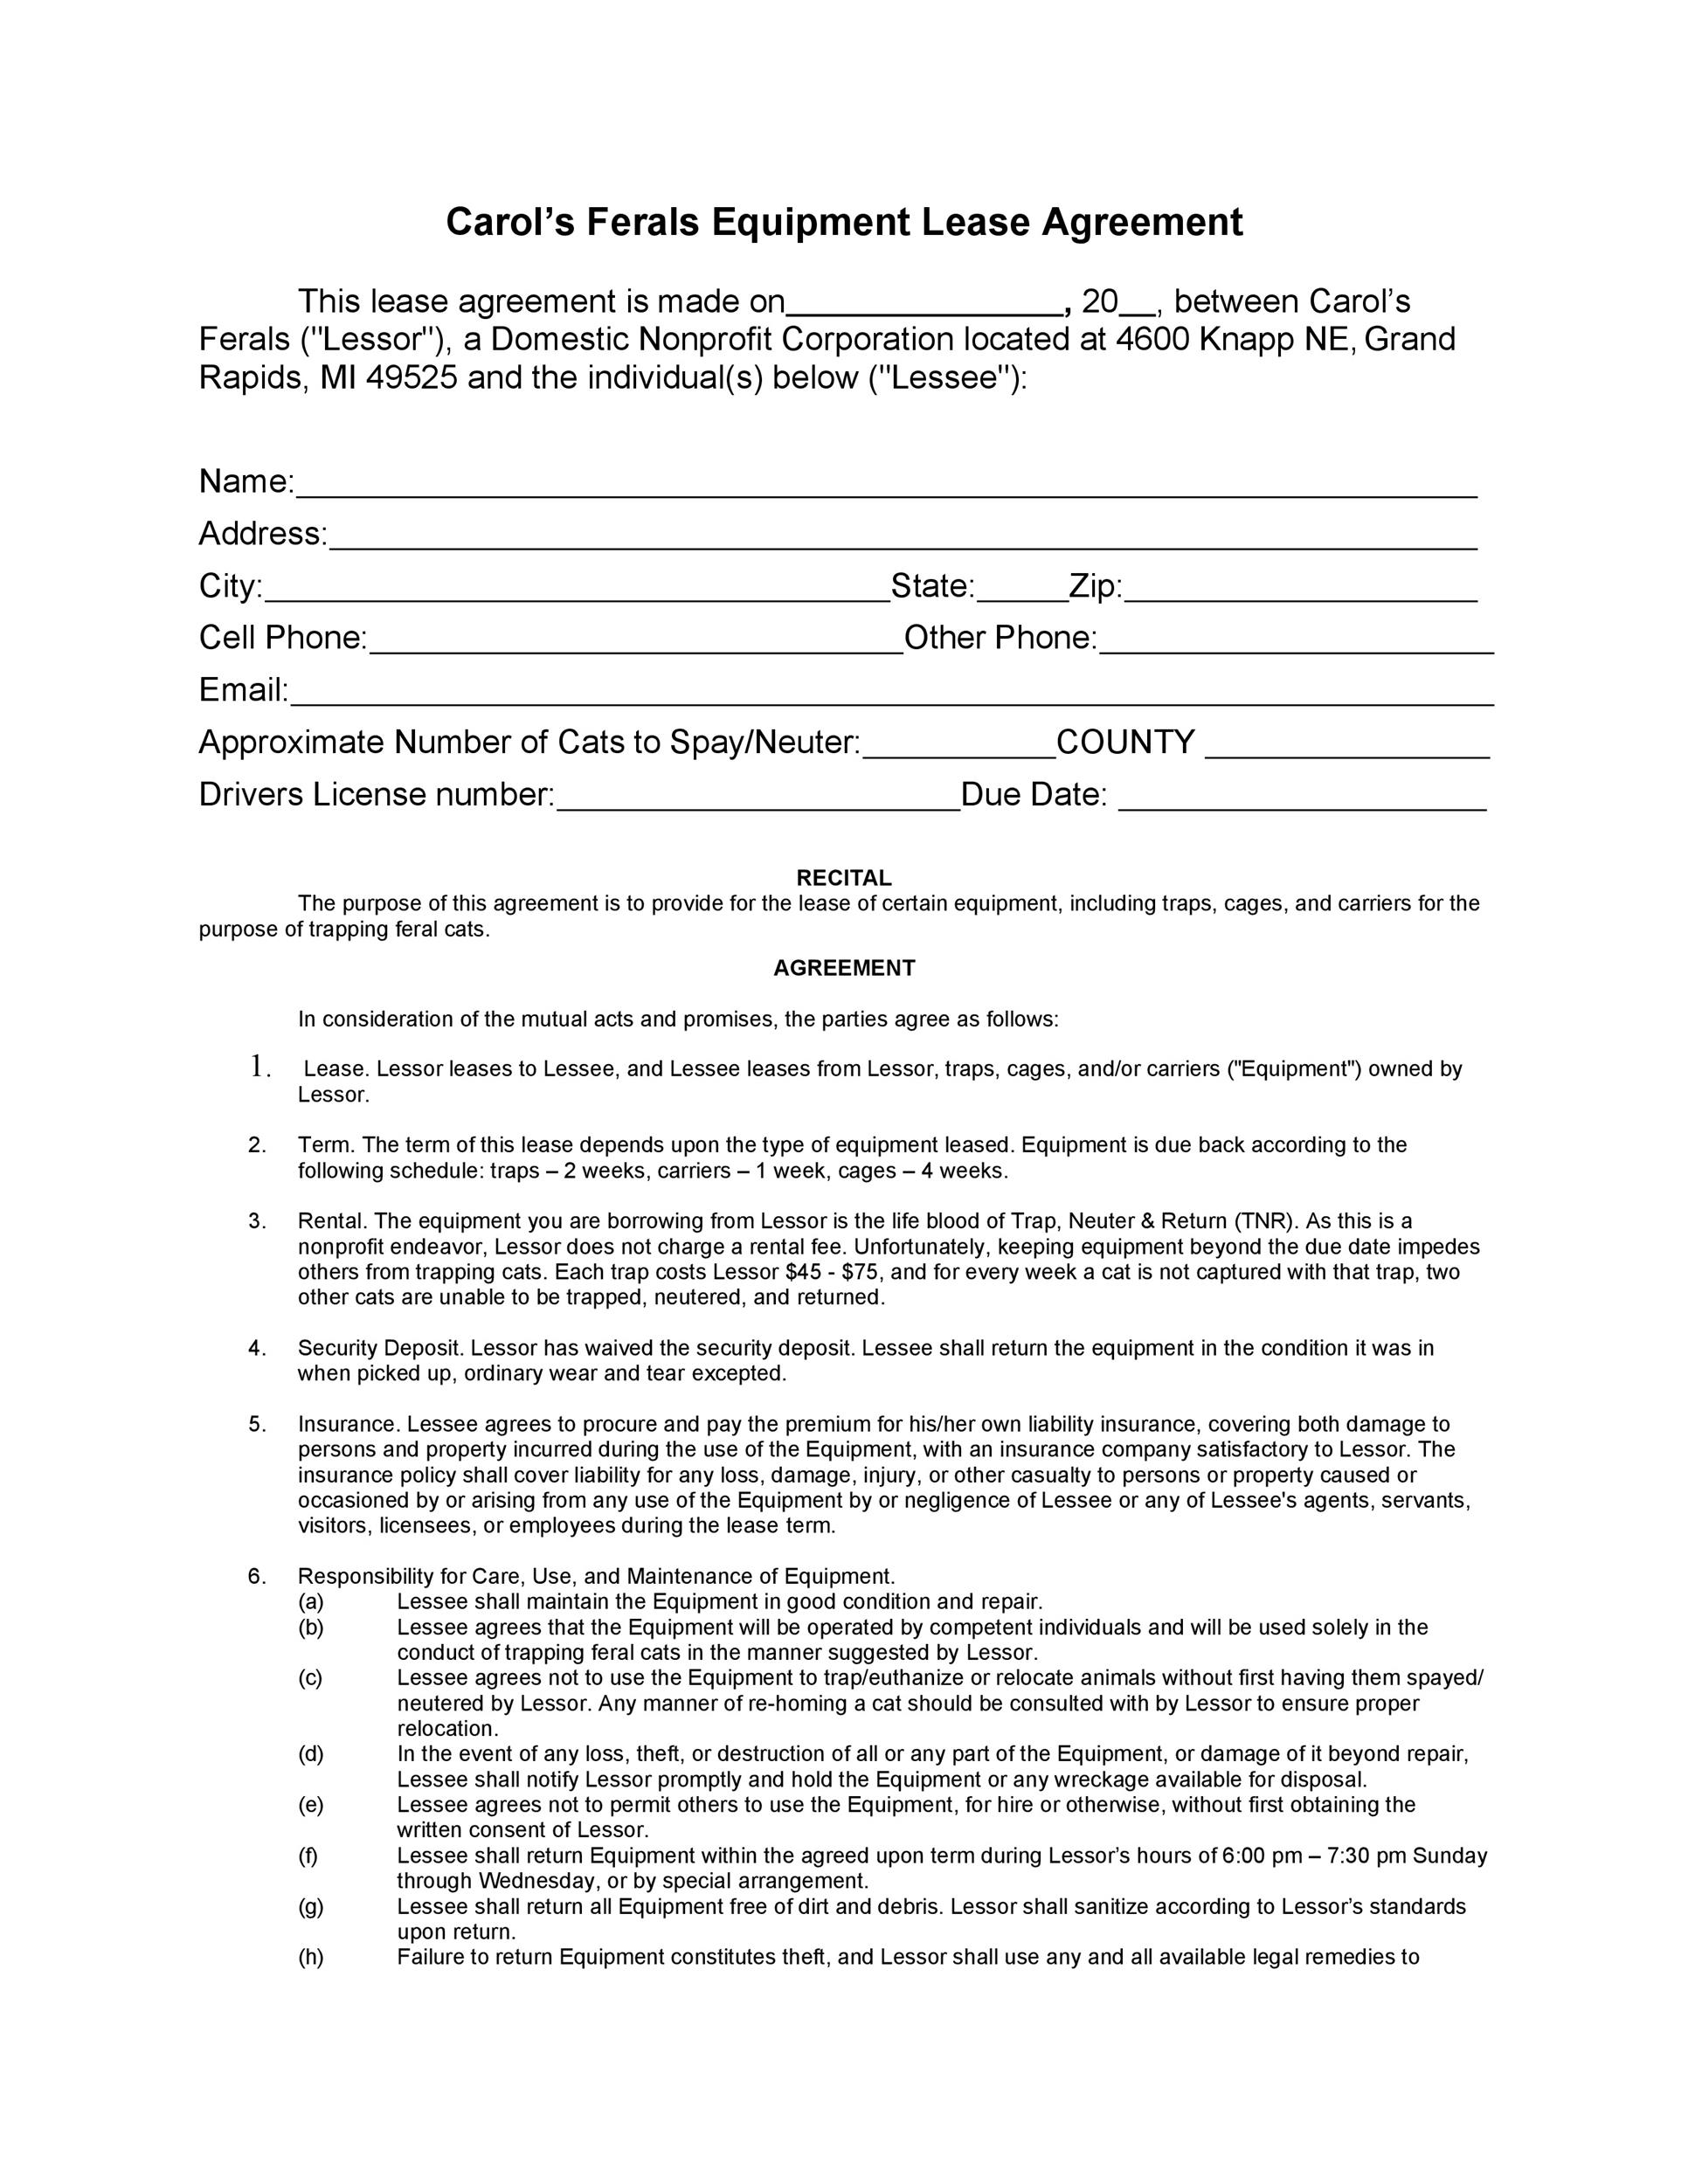 Equipment Lease Agreement Template Free Download